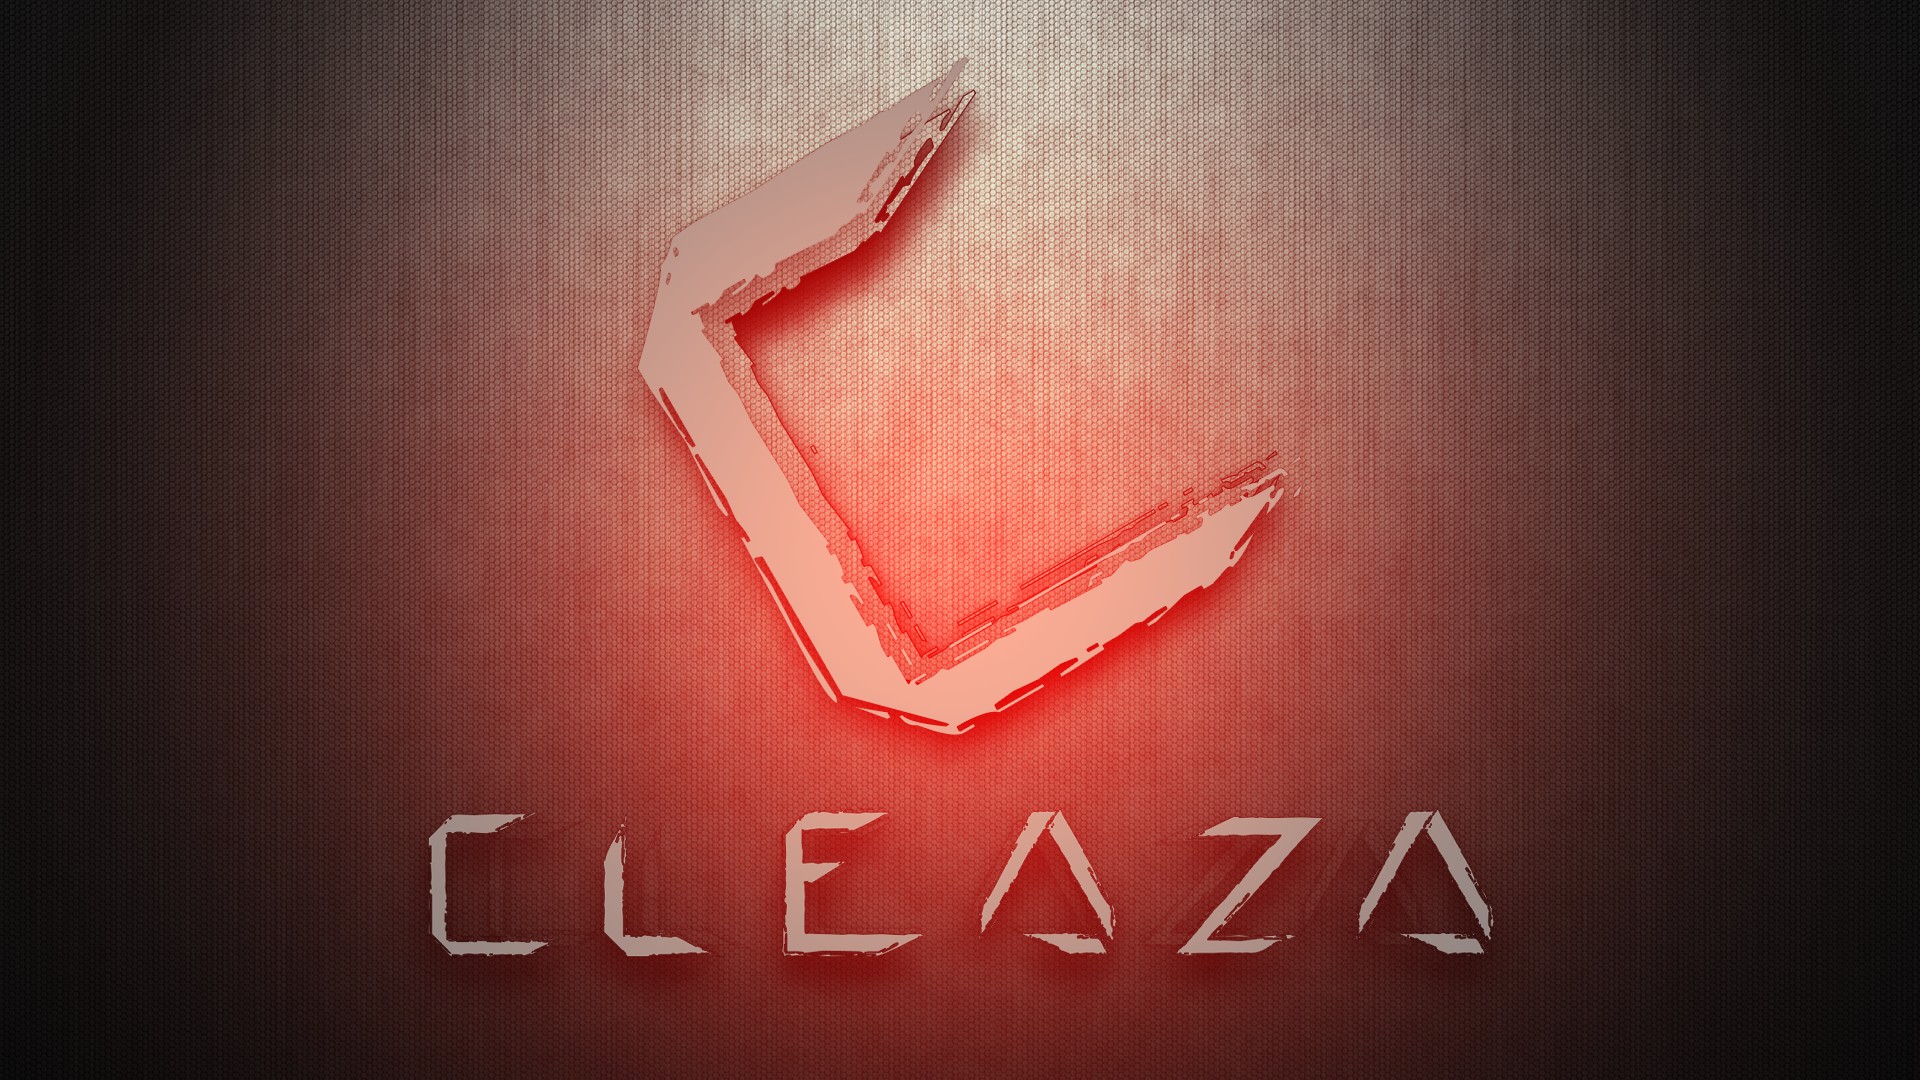 PC gaming, Cleaza Wallpaper